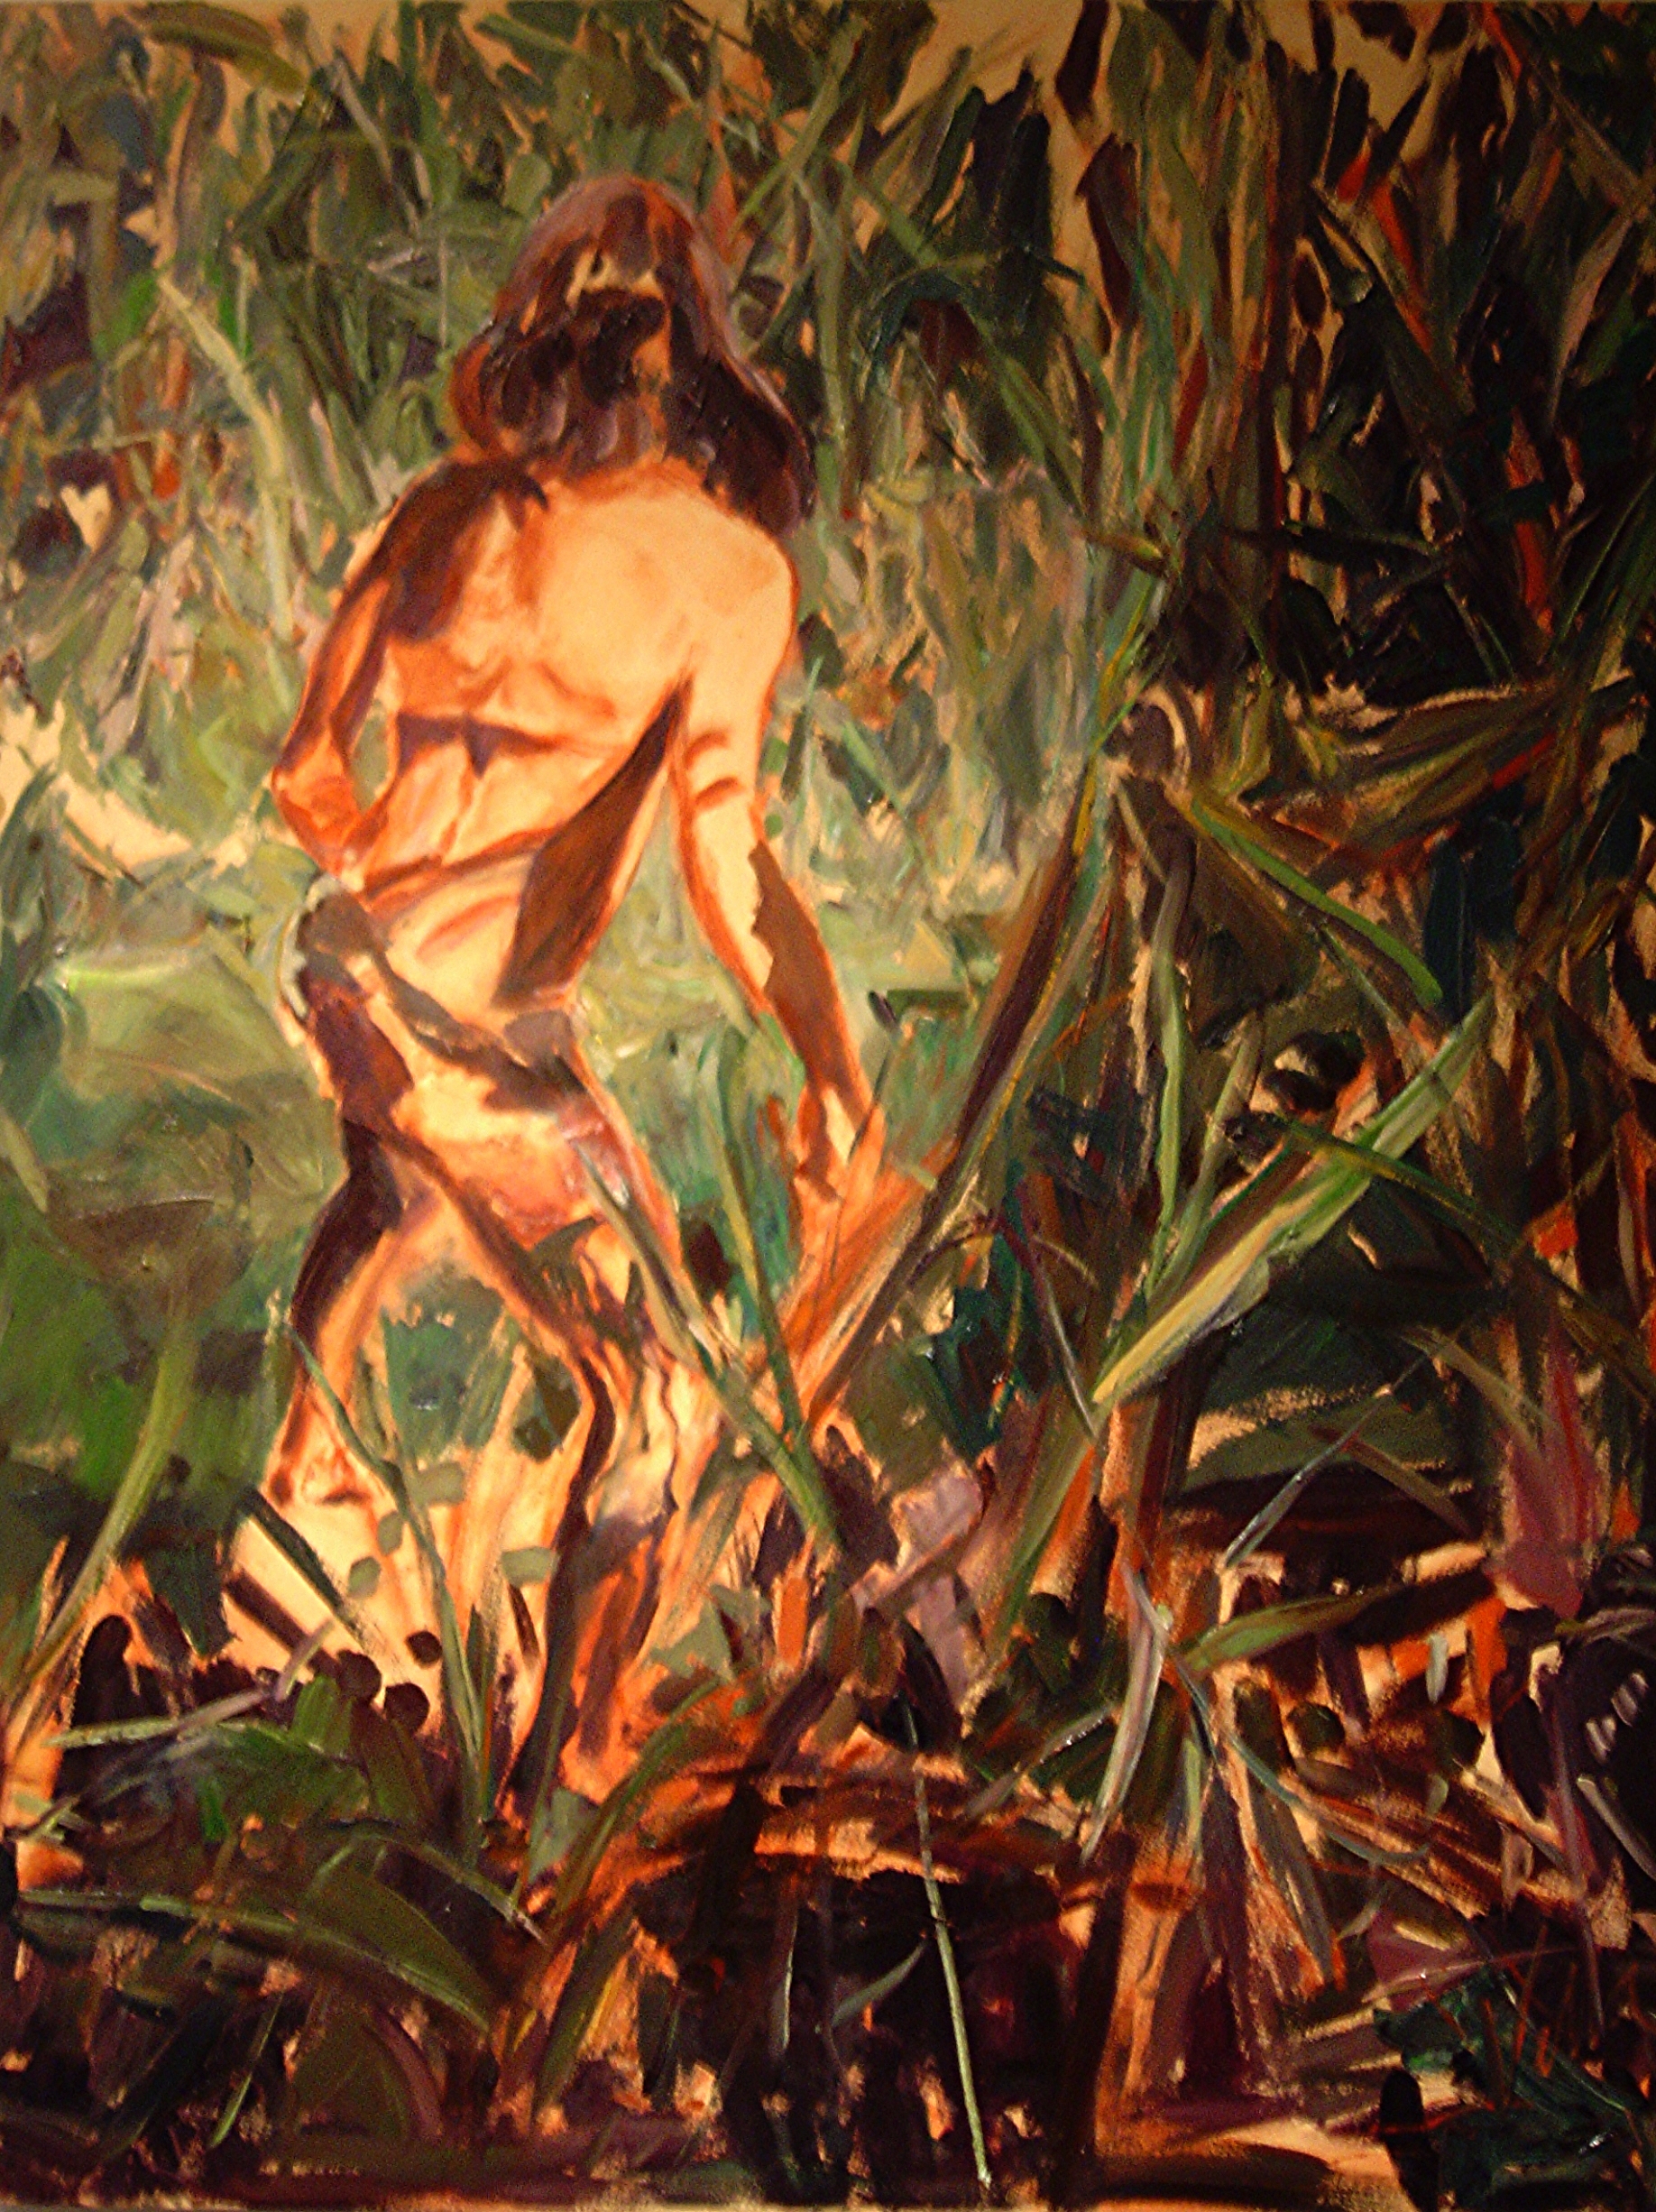 Beat of the Drum, 2006, oil on canvas, 54" x 42".